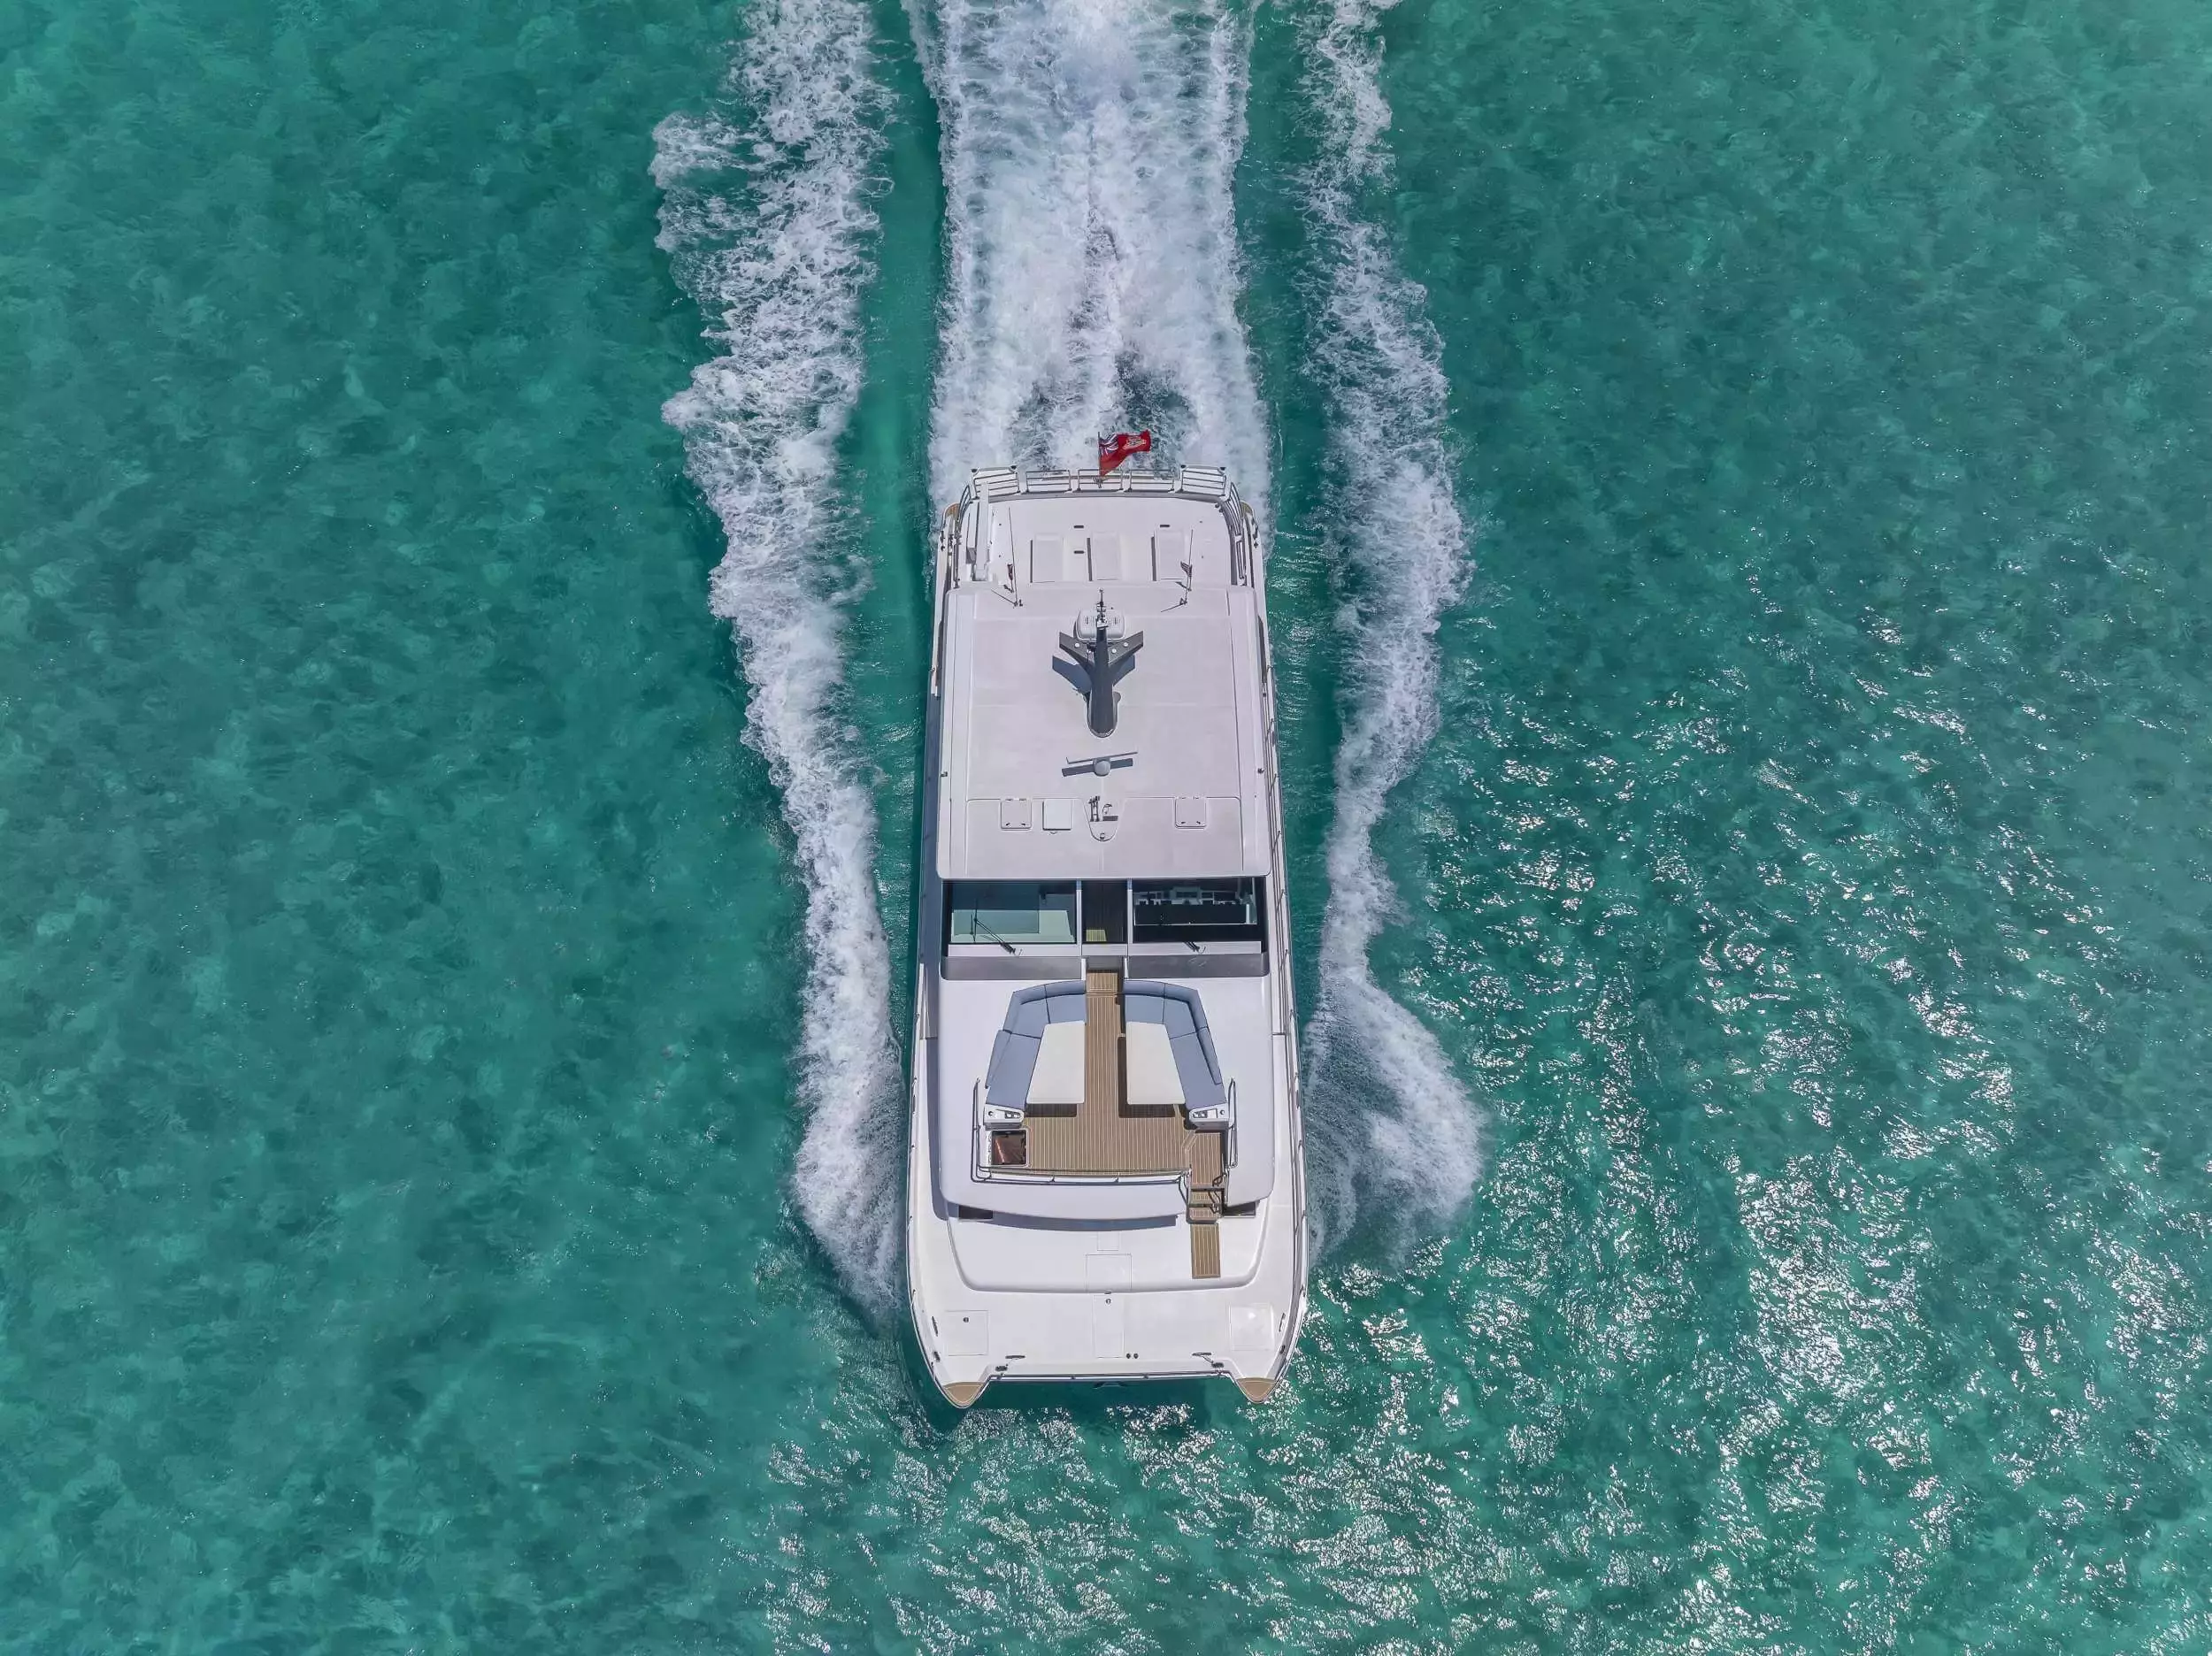 Omakase by Horizon - Top rates for a Rental of a private Power Catamaran in US Virgin Islands